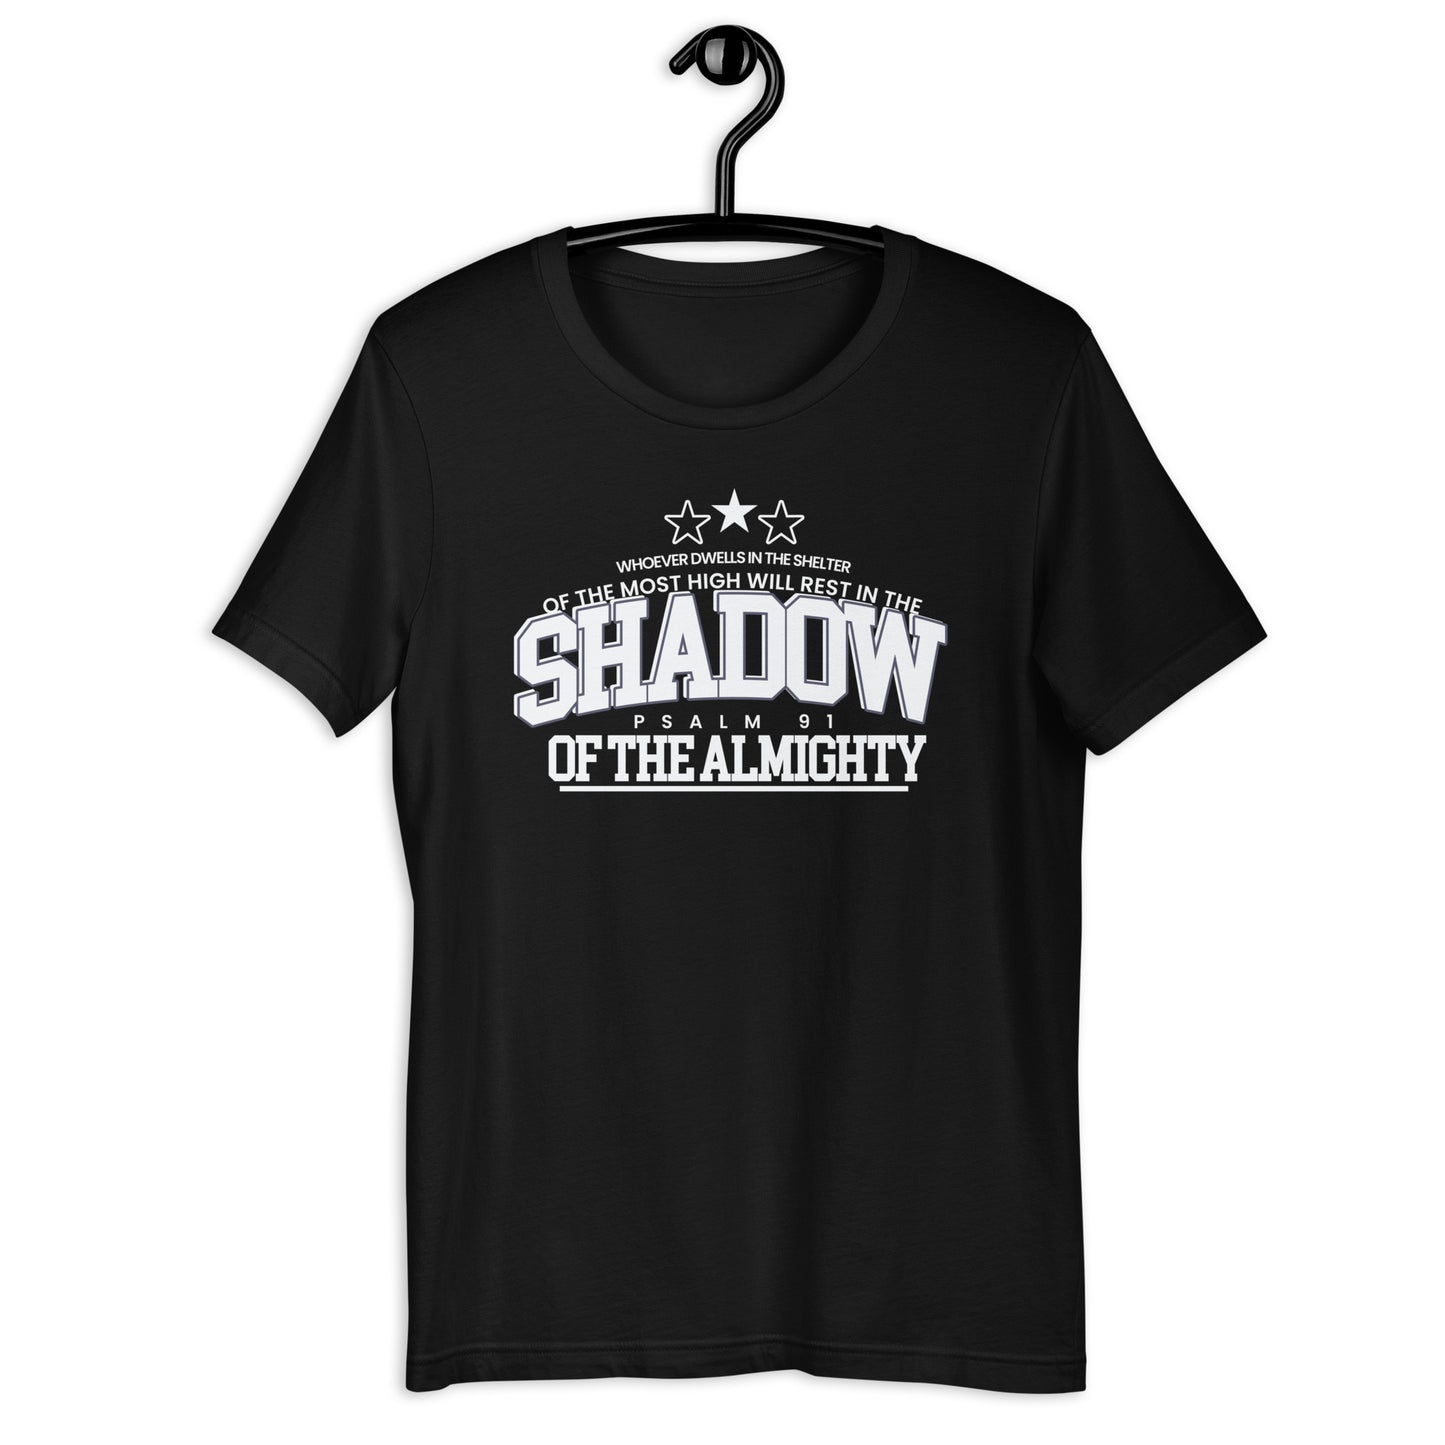 Shadow of the Almighty-SS Unisex T-Shirt